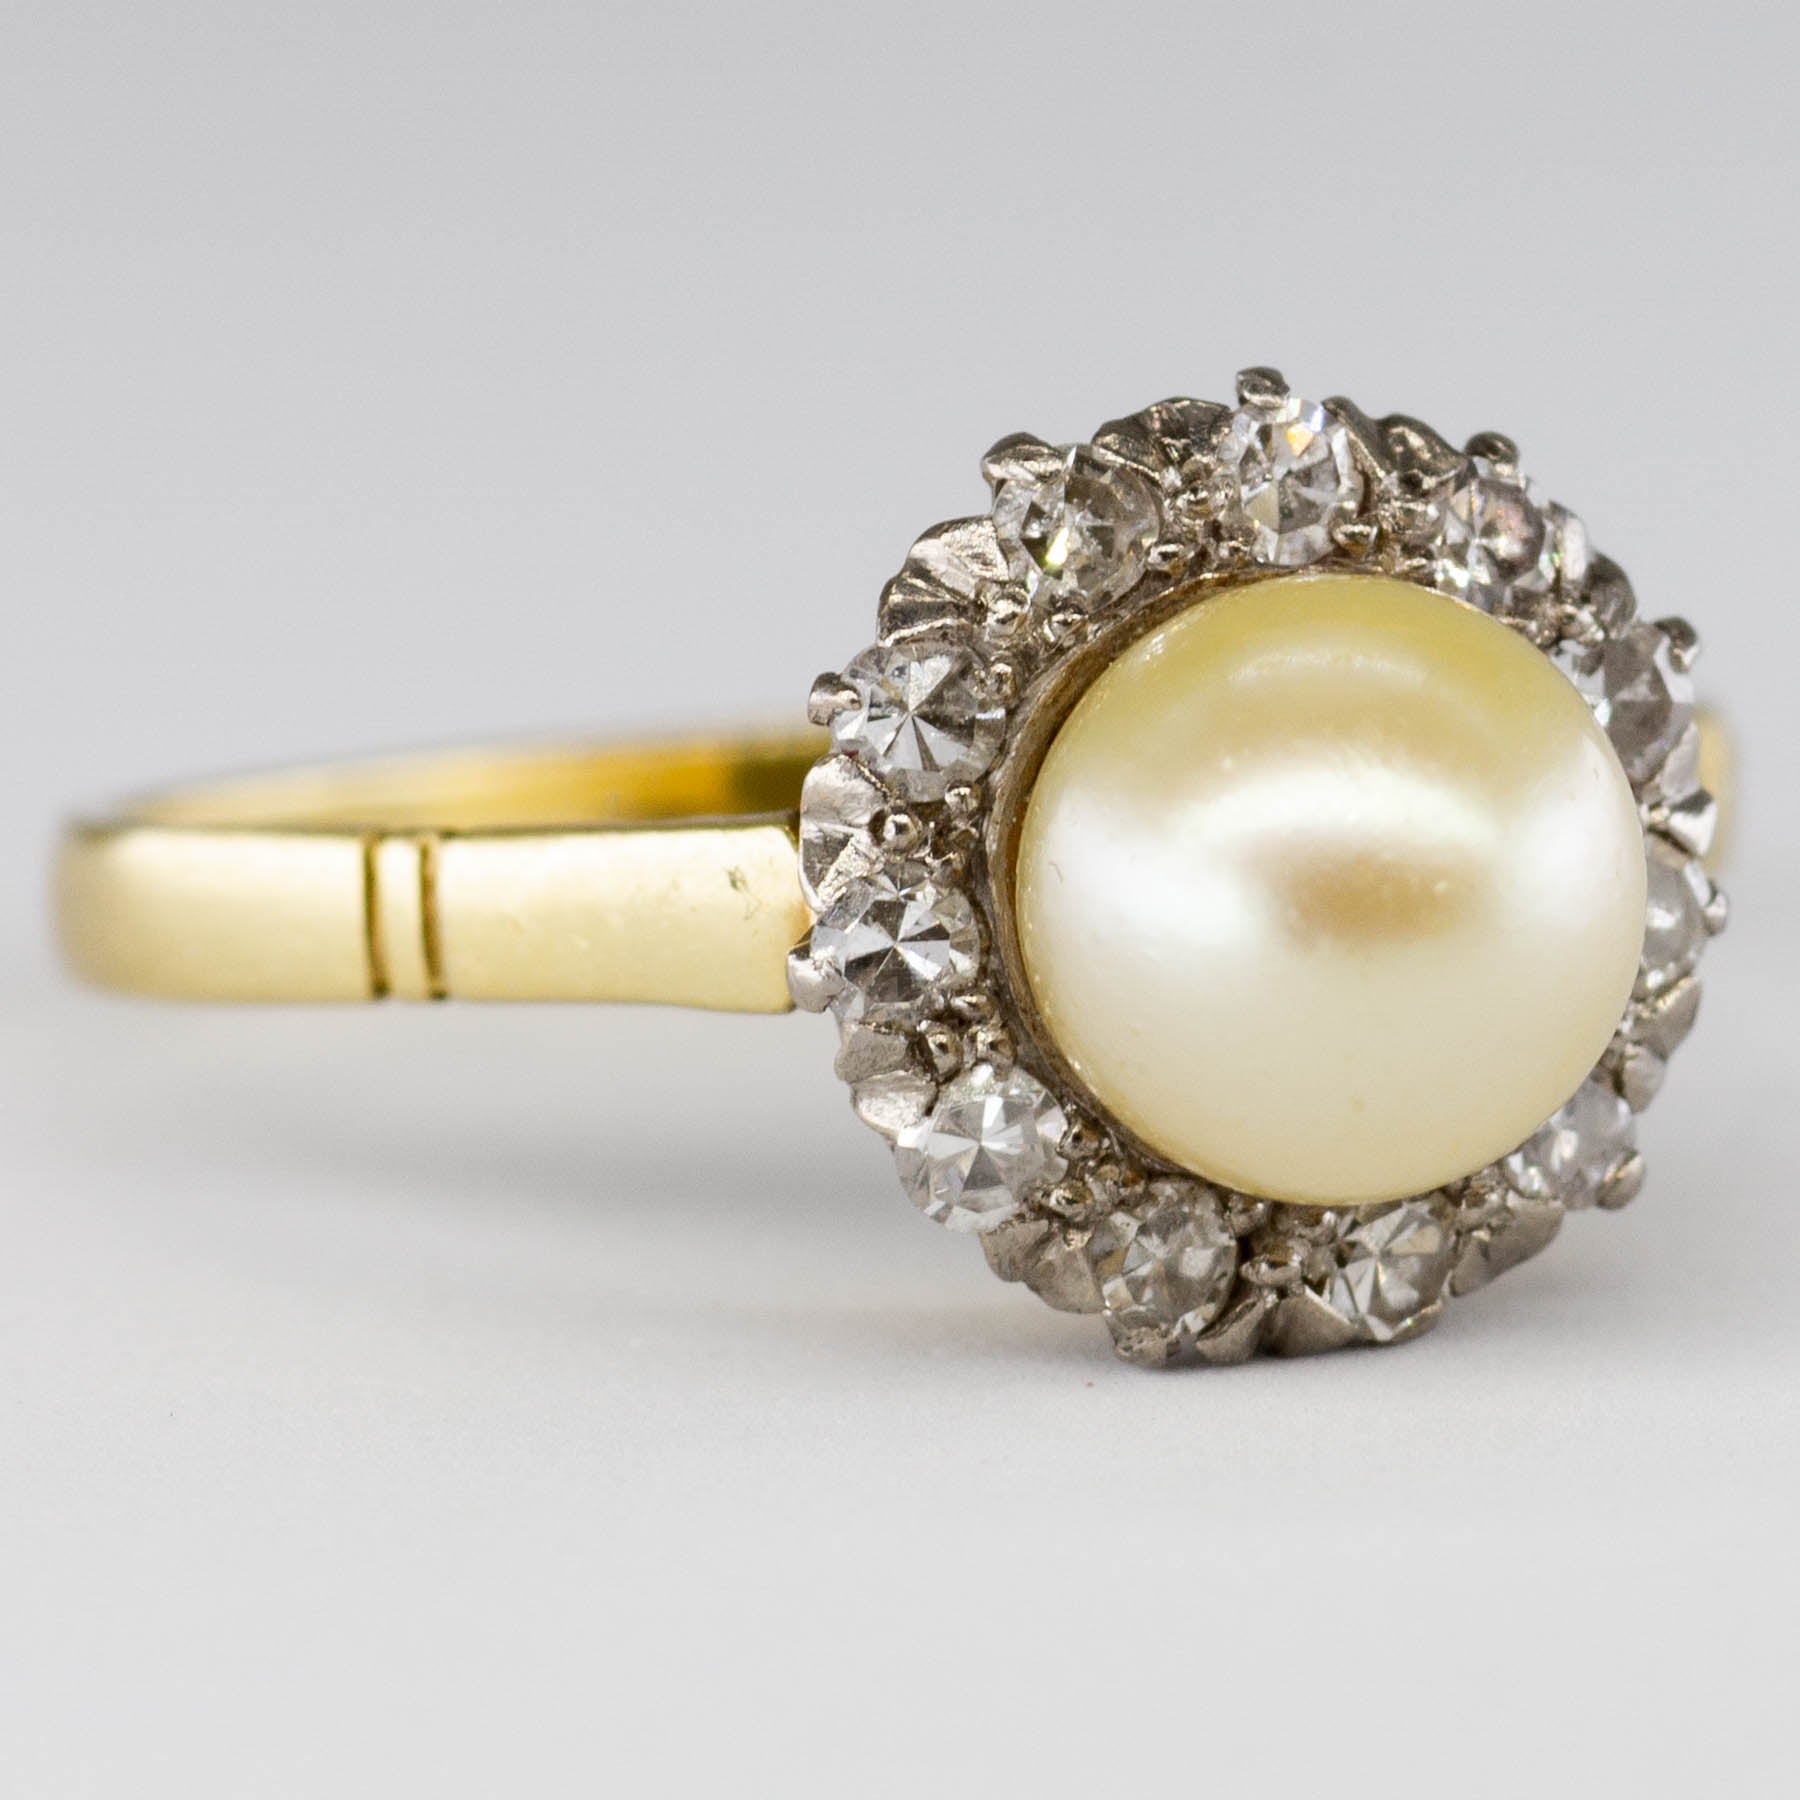 Vintage 18k Gold Pearl and Diamond Ring| 7mm | SZ 8.25